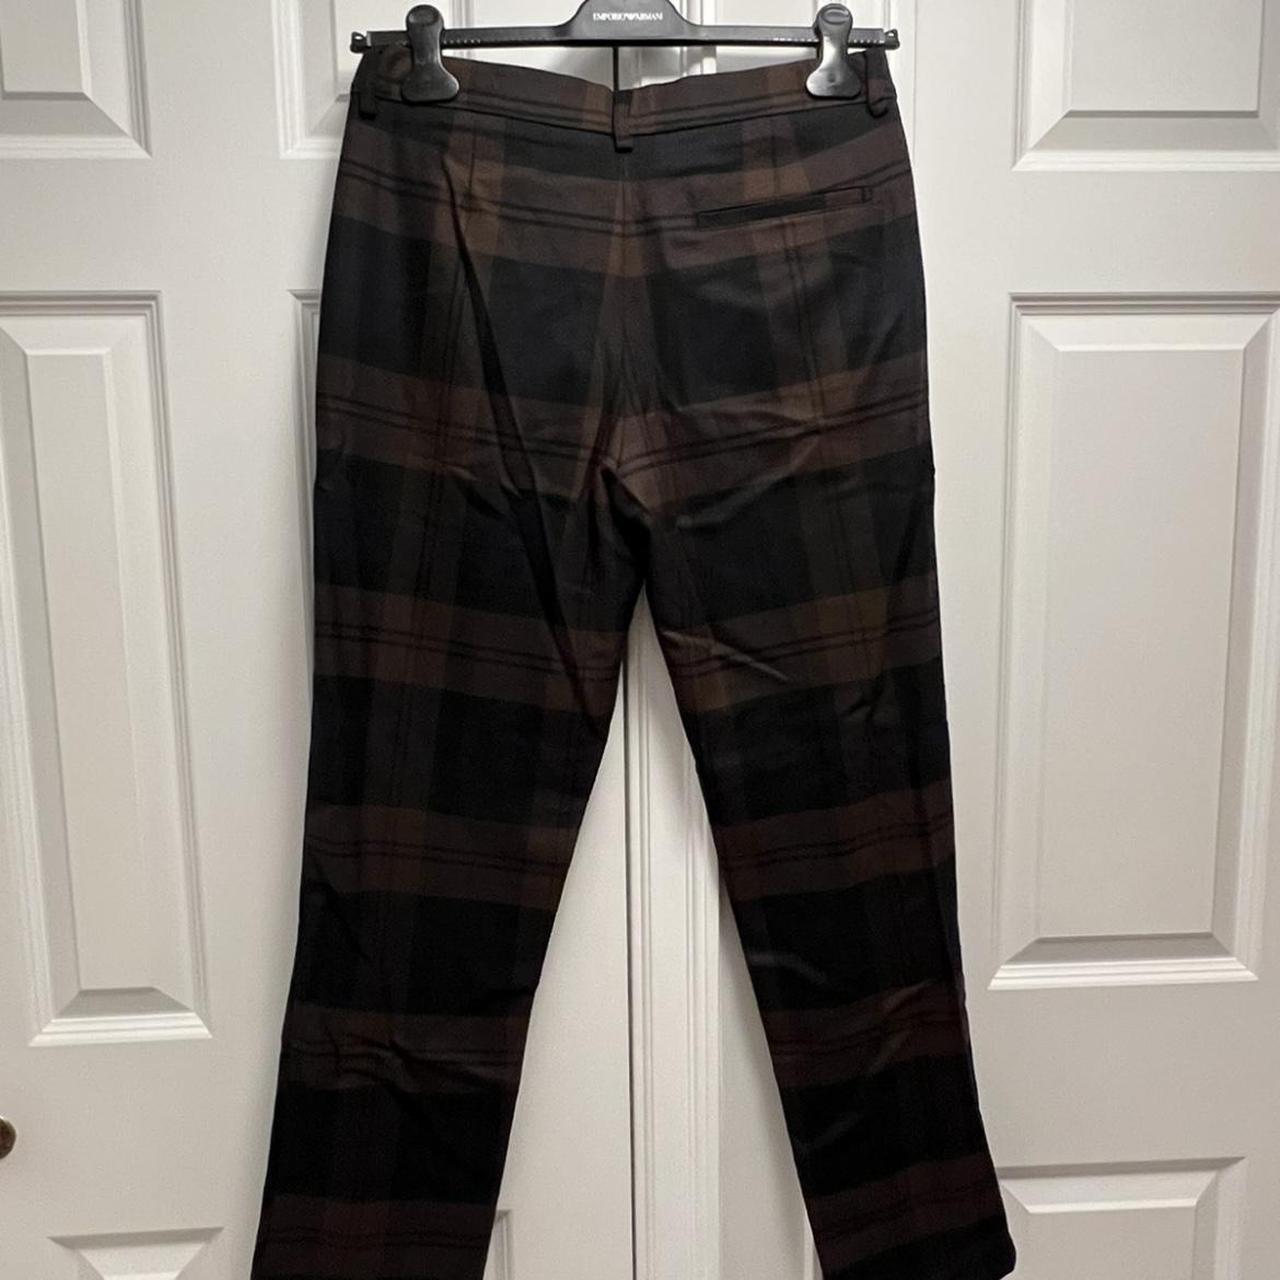 River Island Men's Brown and Black Trousers (2)